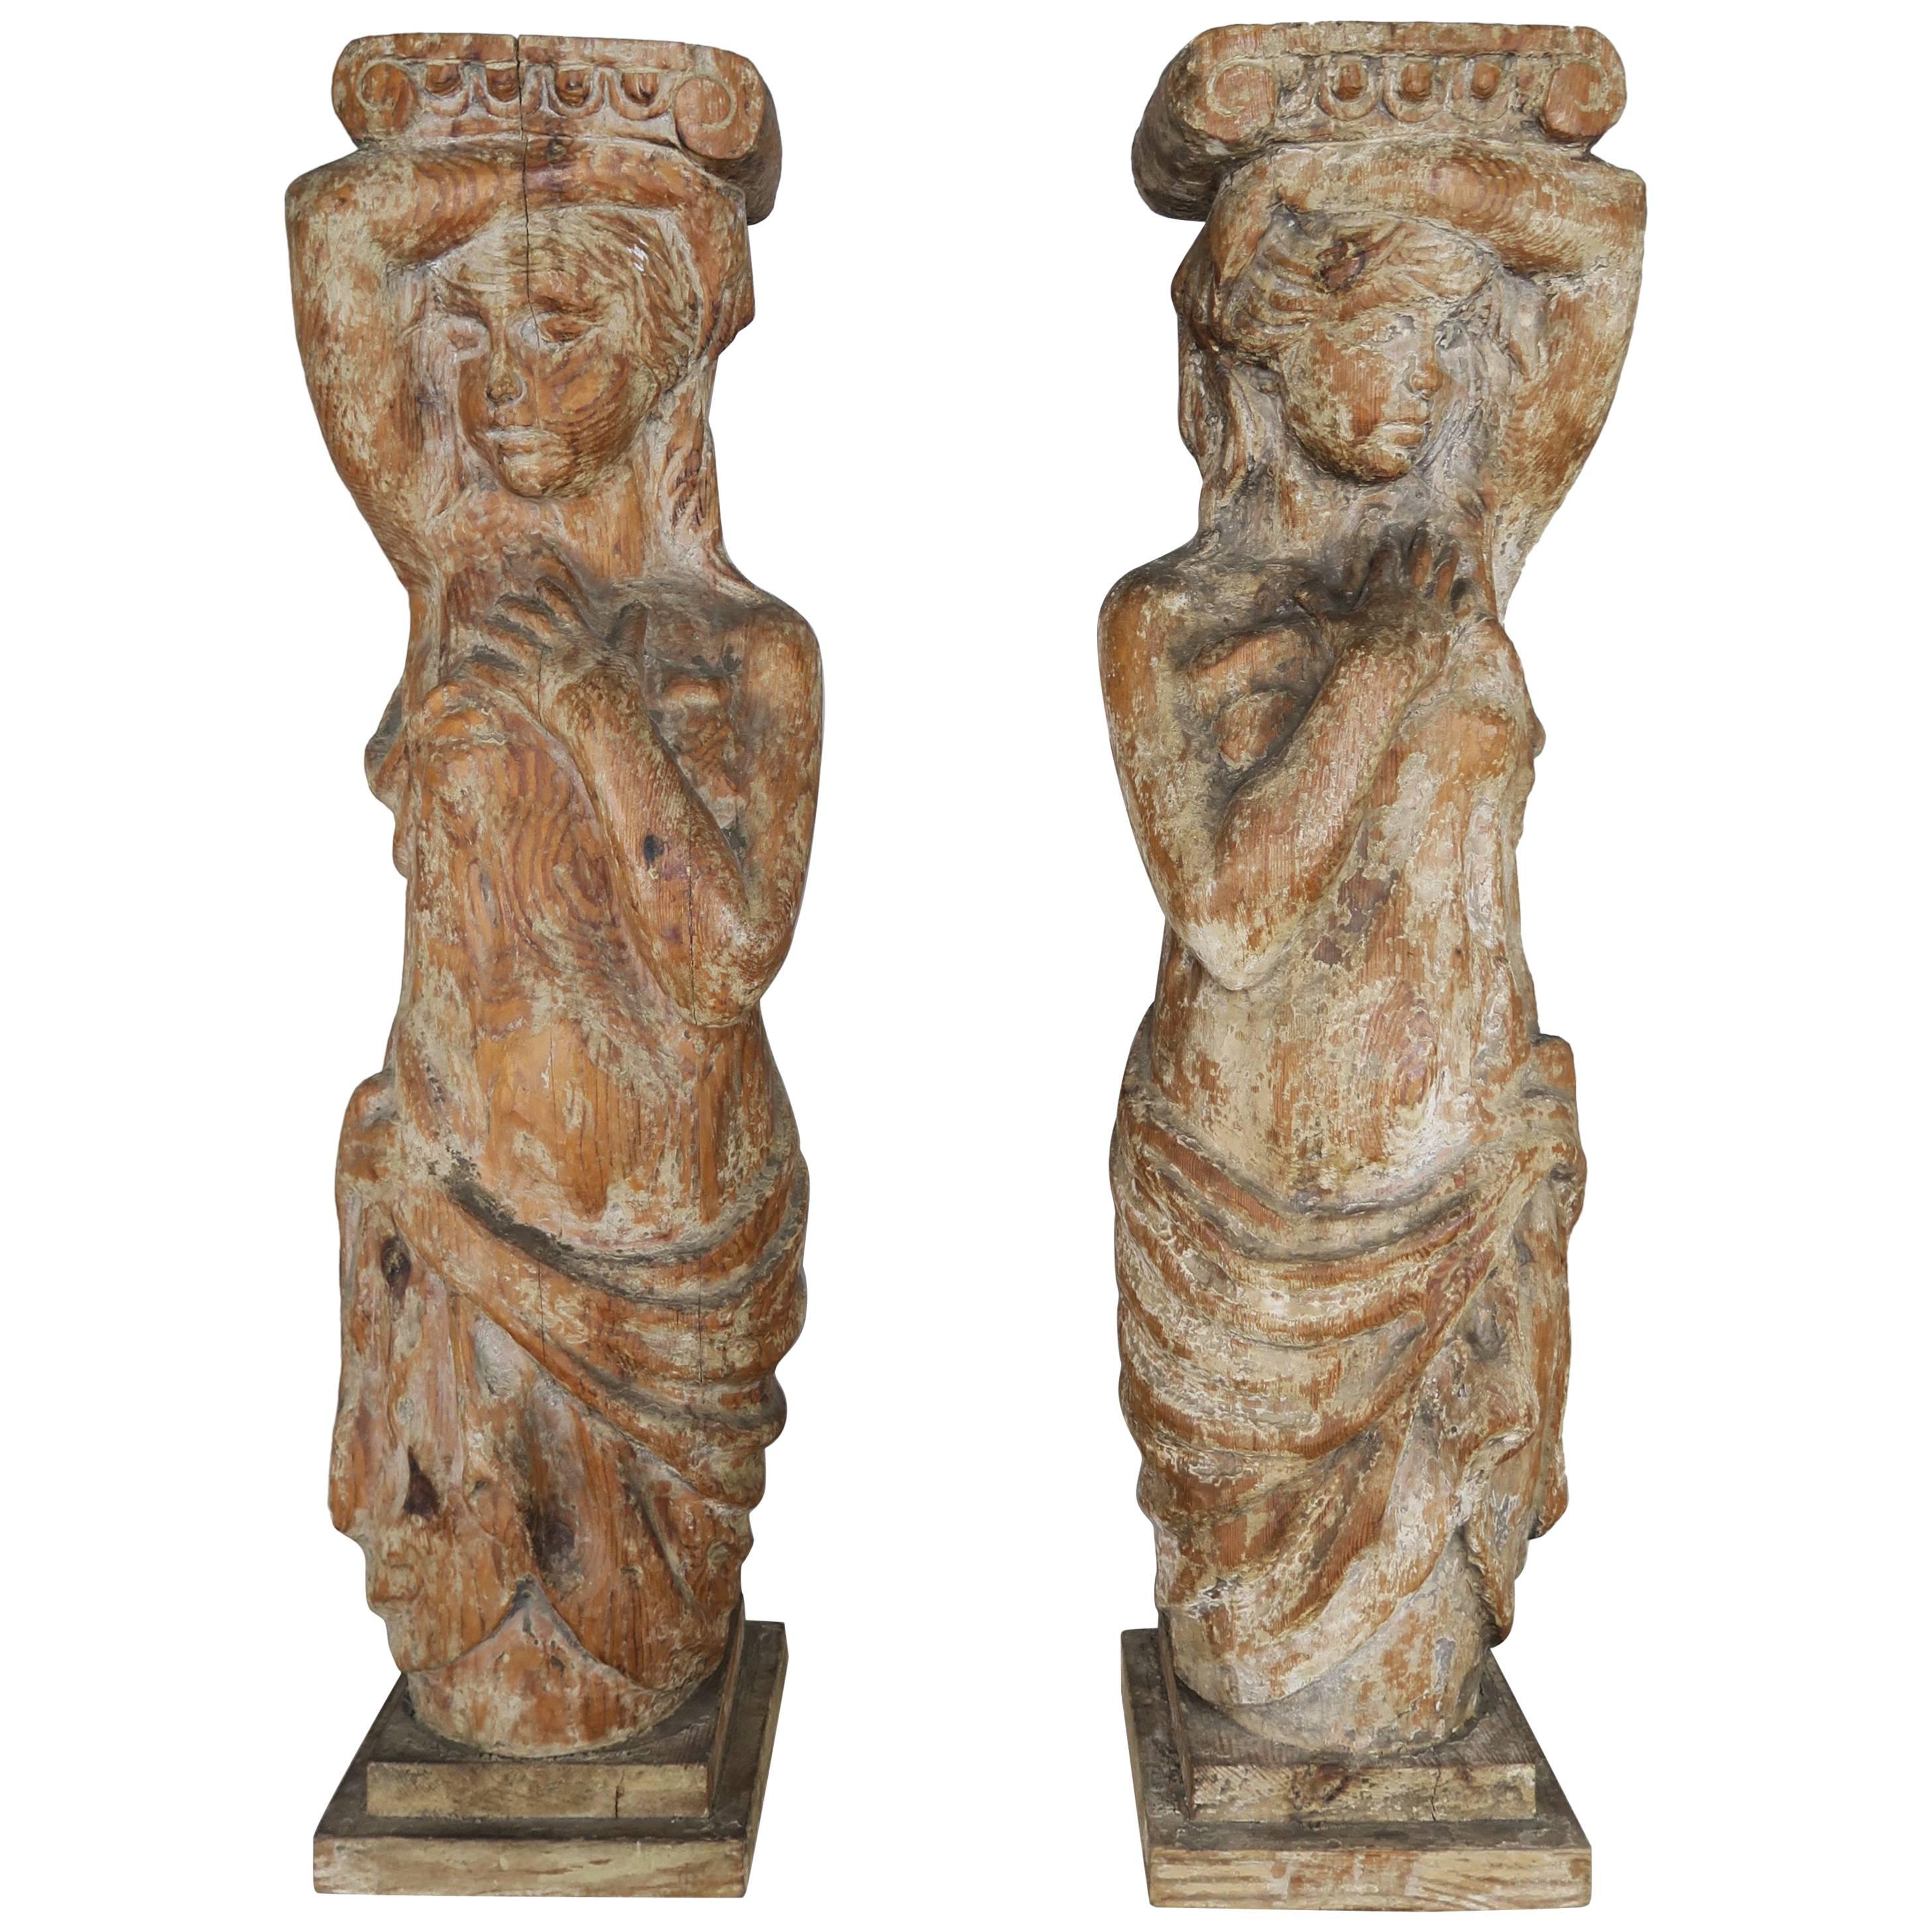 Pair of Spanish Carved Wood Figural Pedestals